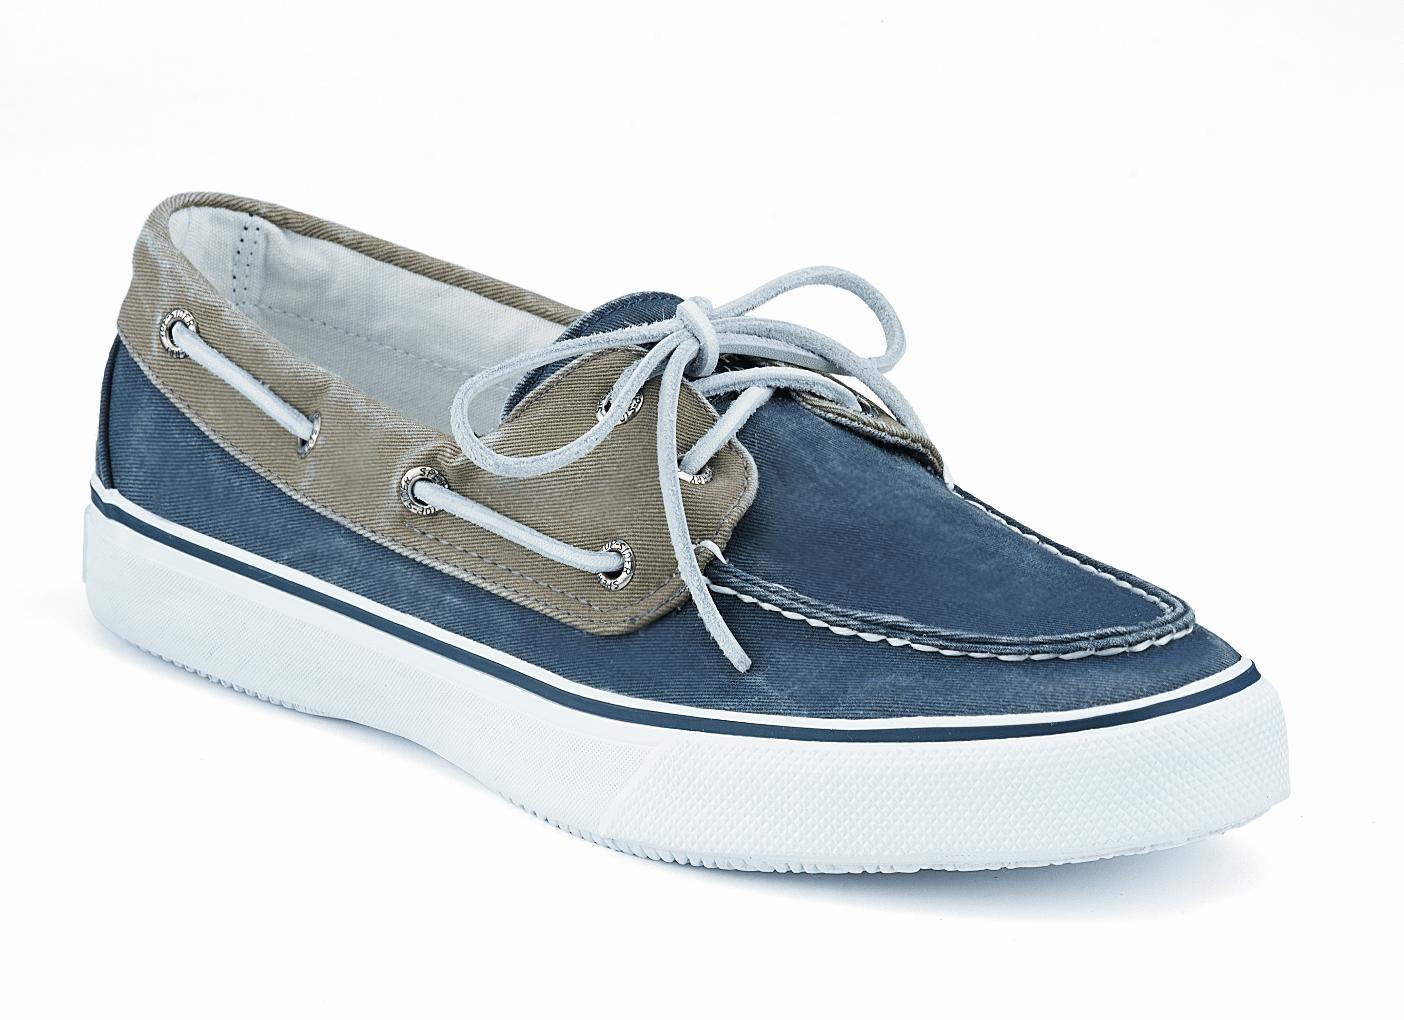 shine of the times our top five moonshines sperry sider bahama shoe in navy